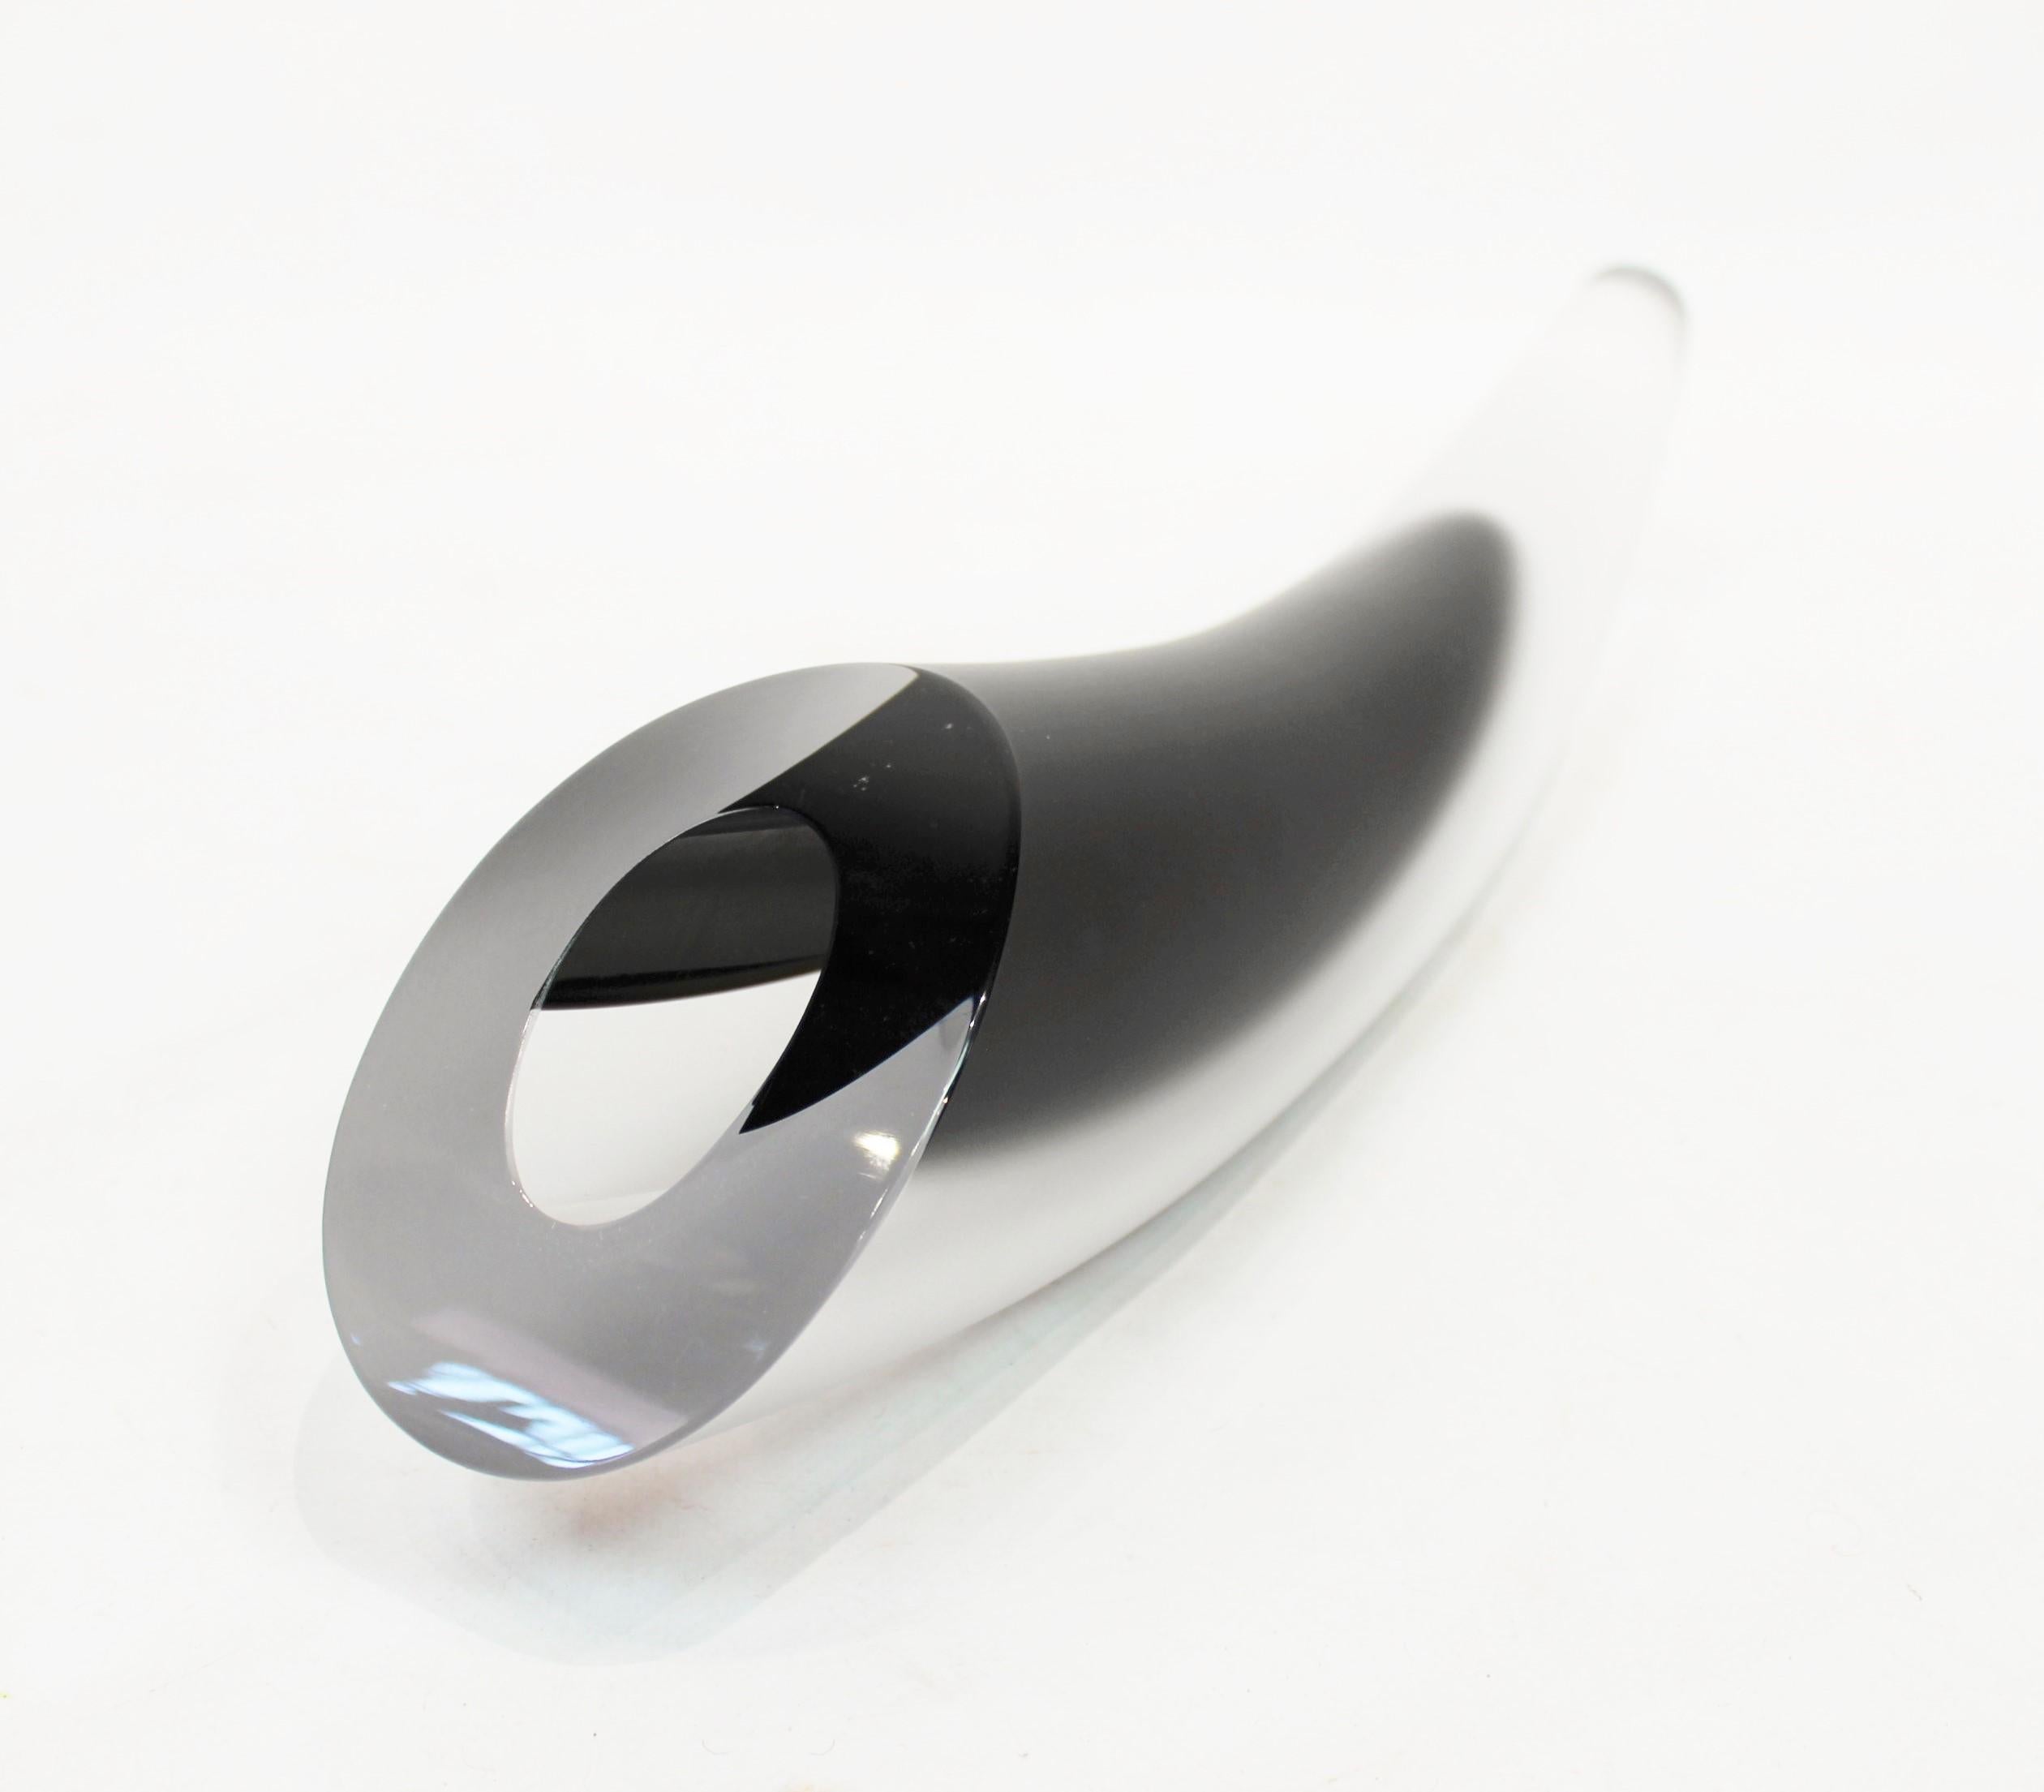 Glass sculpture, limited edition, by Göran Wärff for Kosta Boda. The sculpture is made of frosted and black glass.
Measures: 12 x 50 x 9 cm.